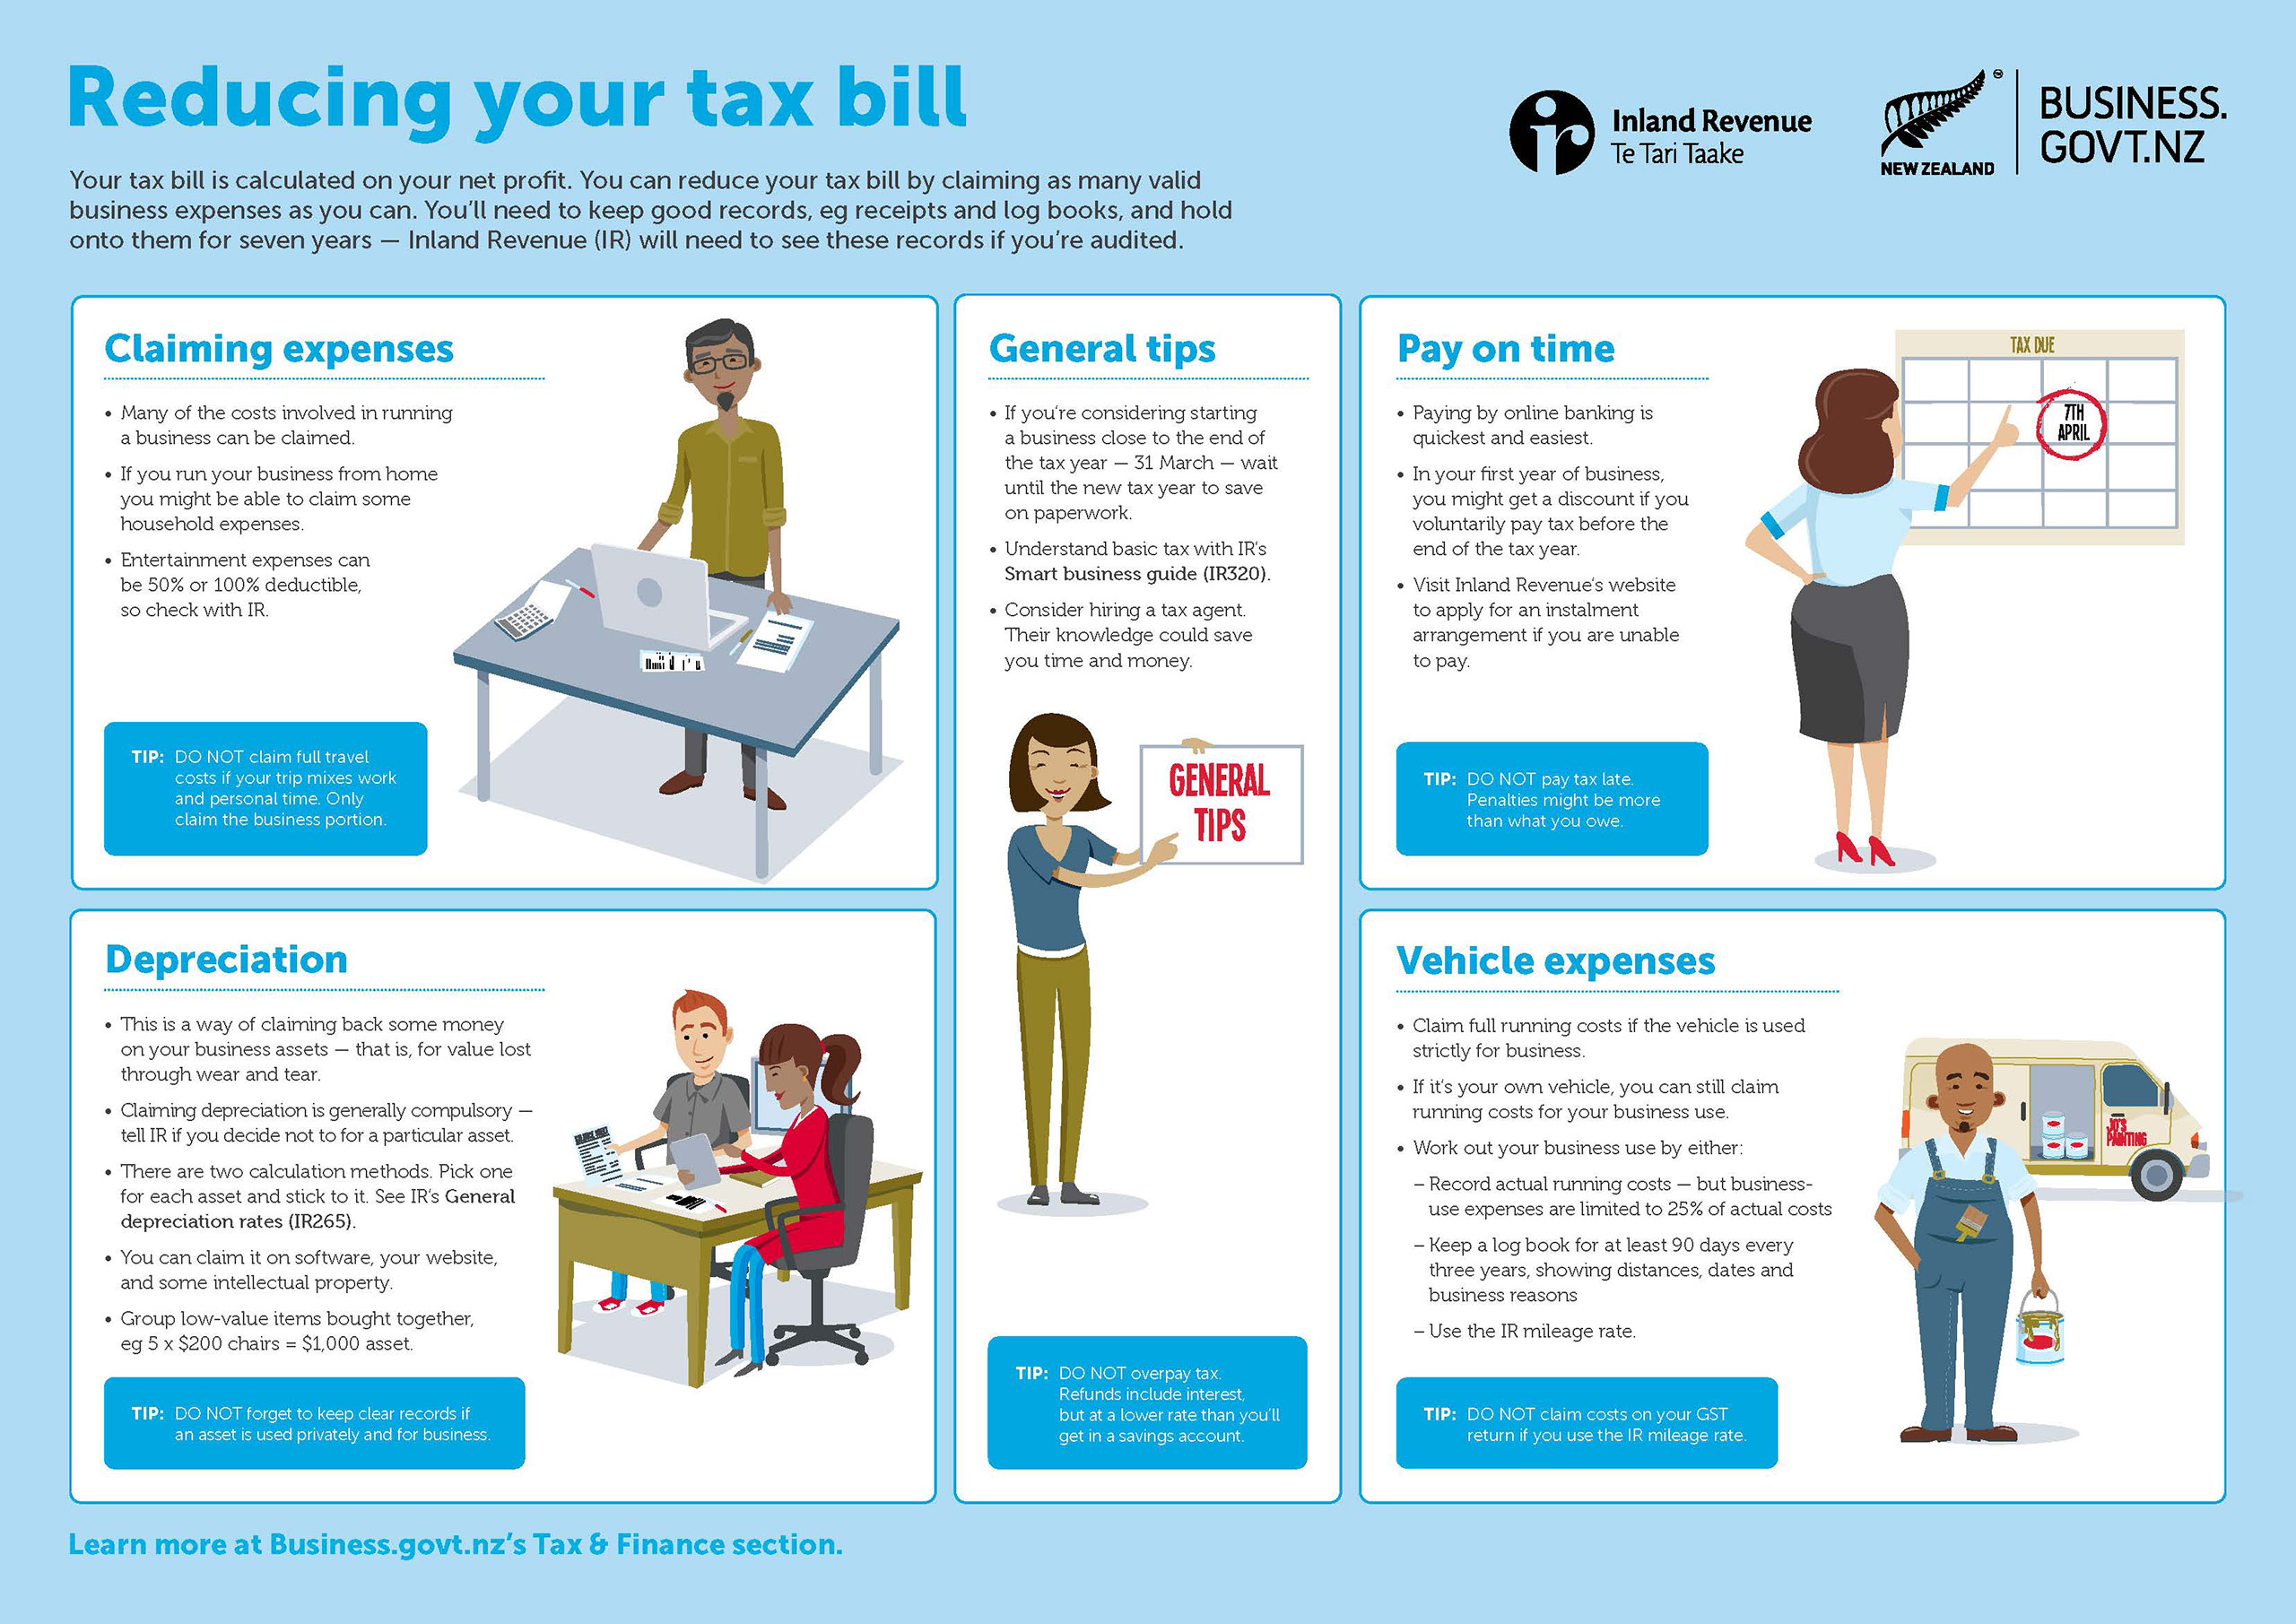 How can you reduce the taxes you pay?